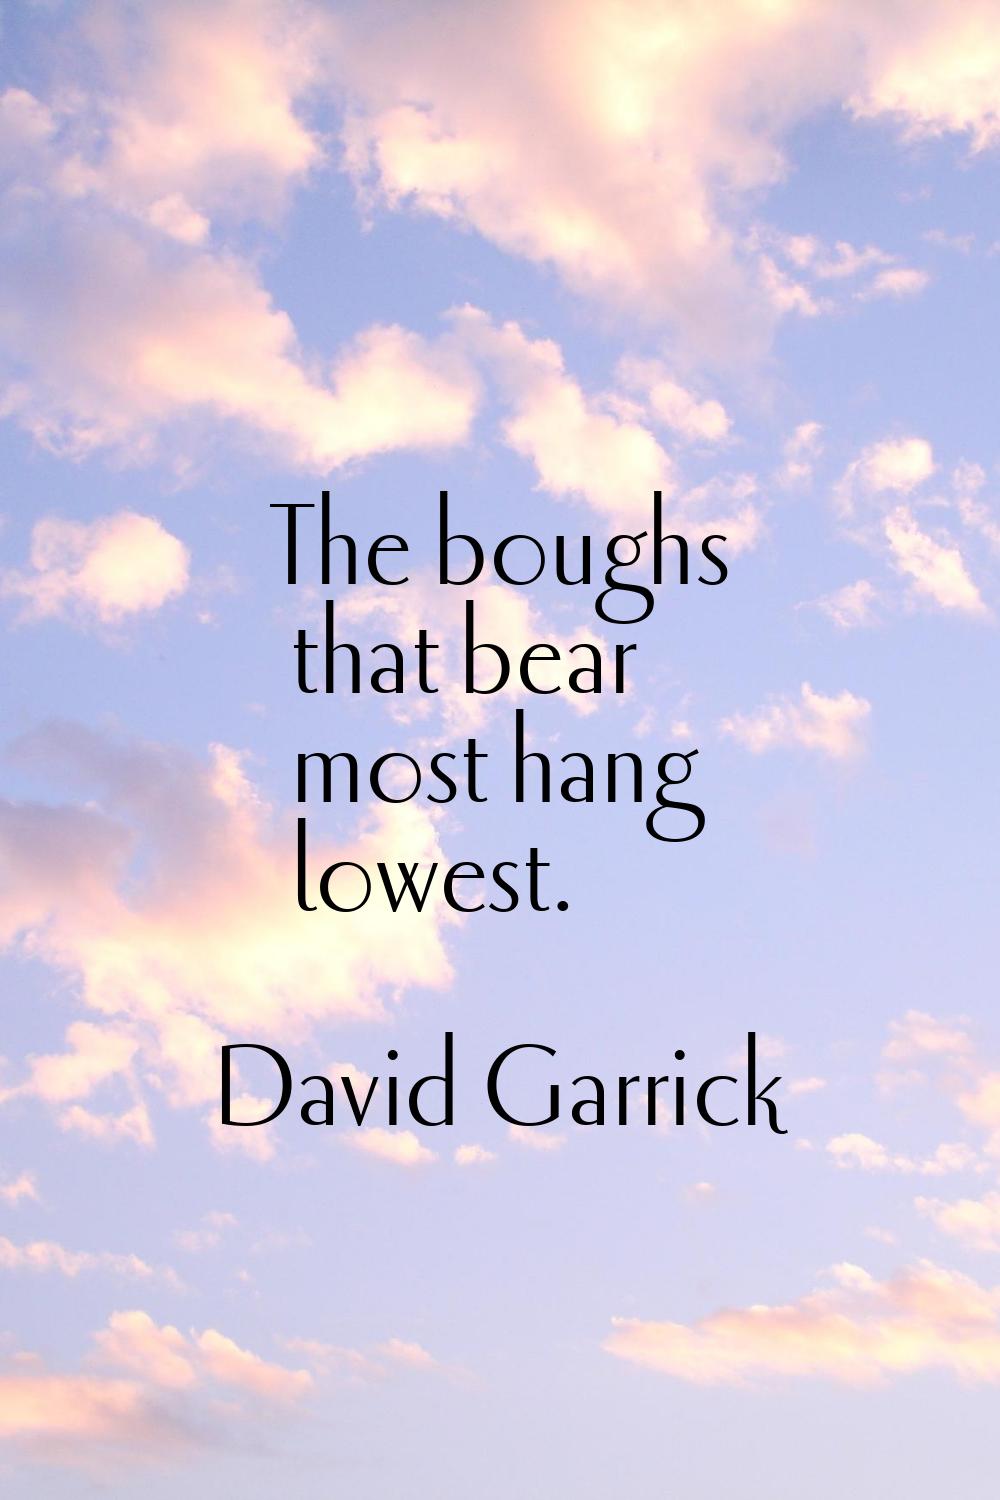 The boughs that bear most hang lowest.